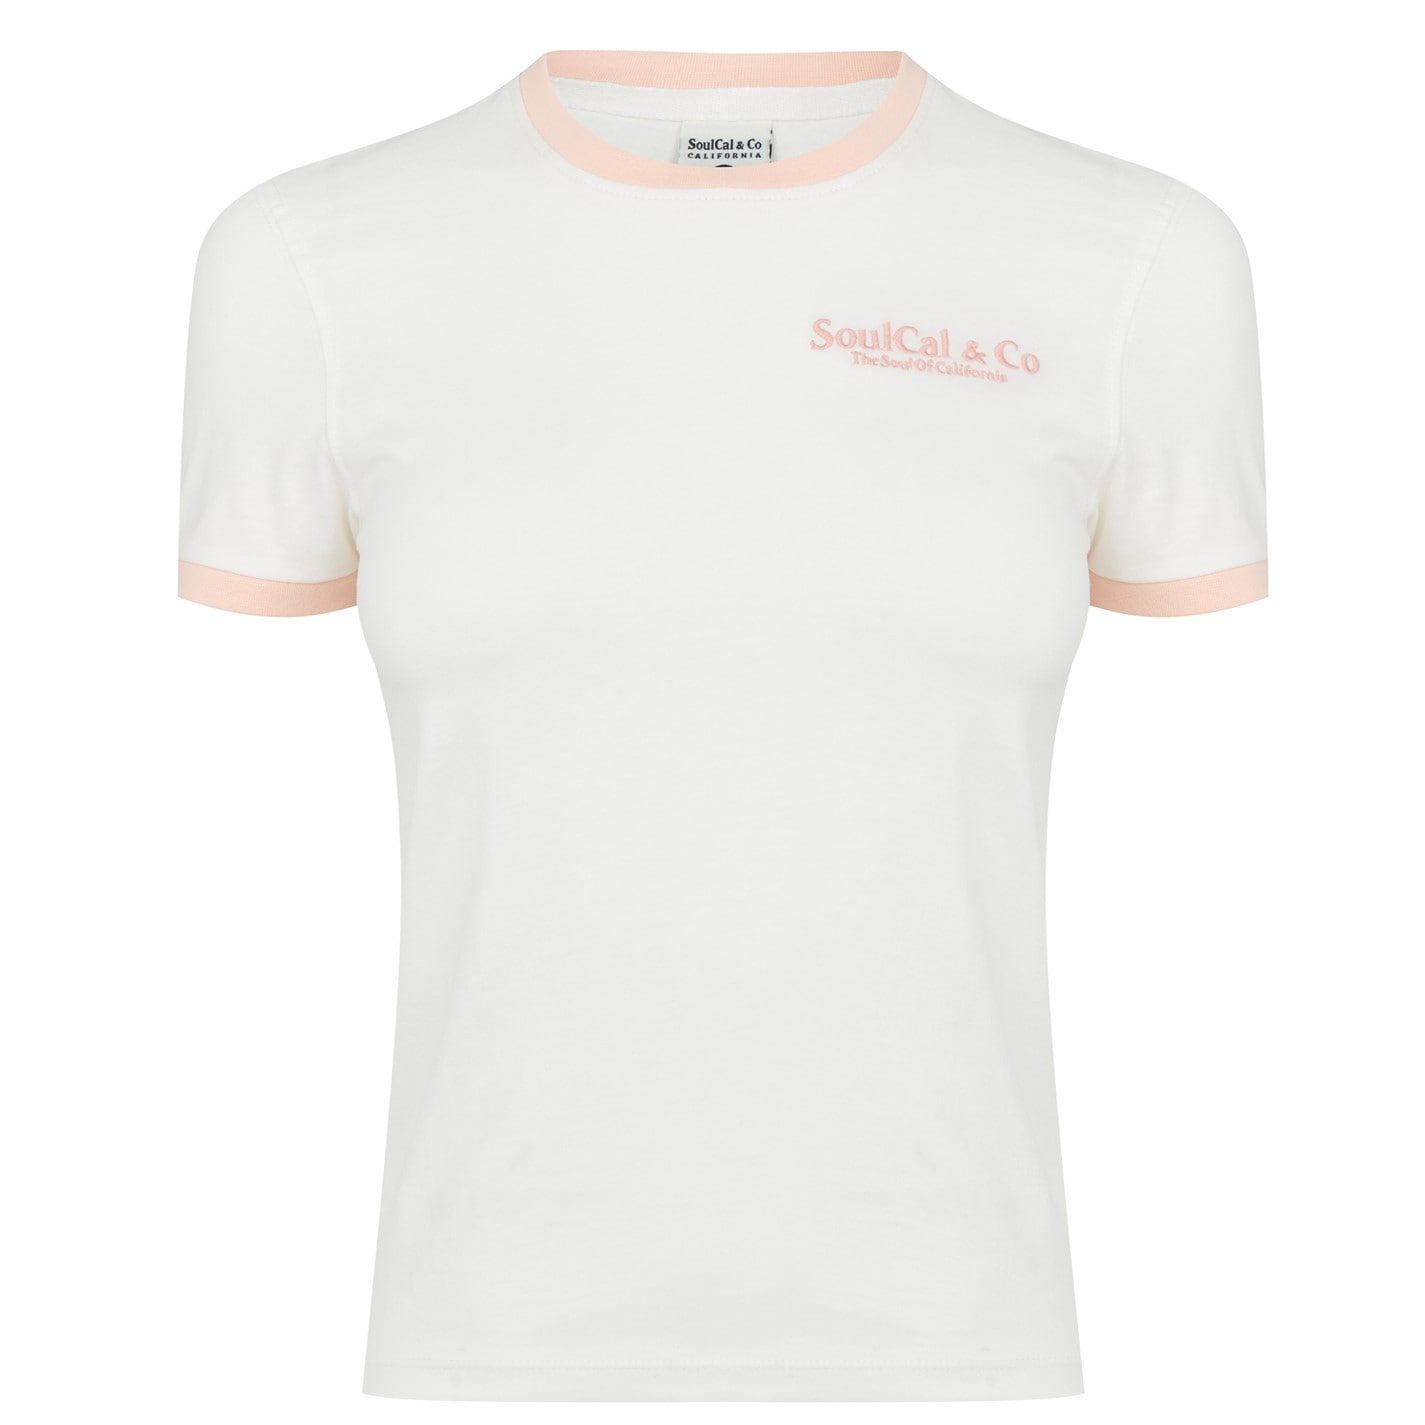 SoulCal Embroidered Ringer T Shirt Womens - This SoulCal Embroidered Ringer T Shirt is crafted with a ribbed crew neckline and short sleeves for a classic look. It features elasticated hems for a comfortable fit and is a lightweight construction. This t shirt is a ringer design with a signature logo and is complete with SoulCal branding.